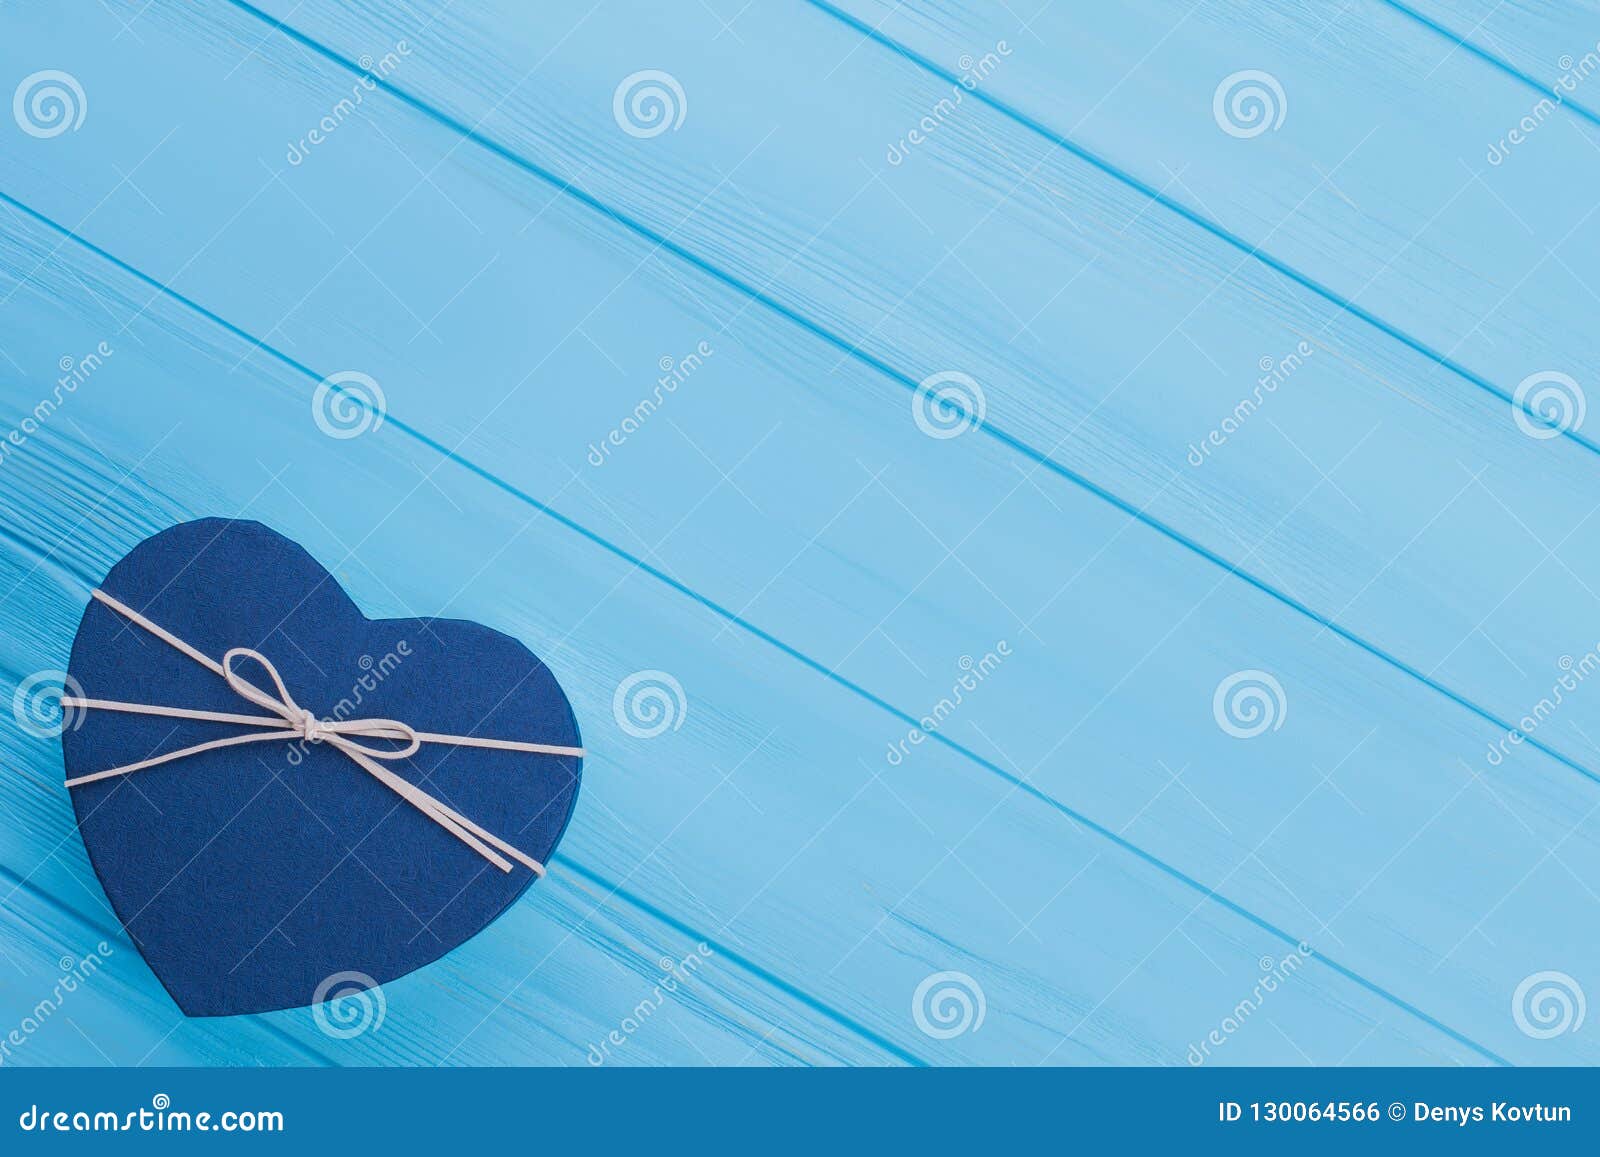 56,733 Blue Heart Ribbon Royalty-Free Images, Stock Photos & Pictures